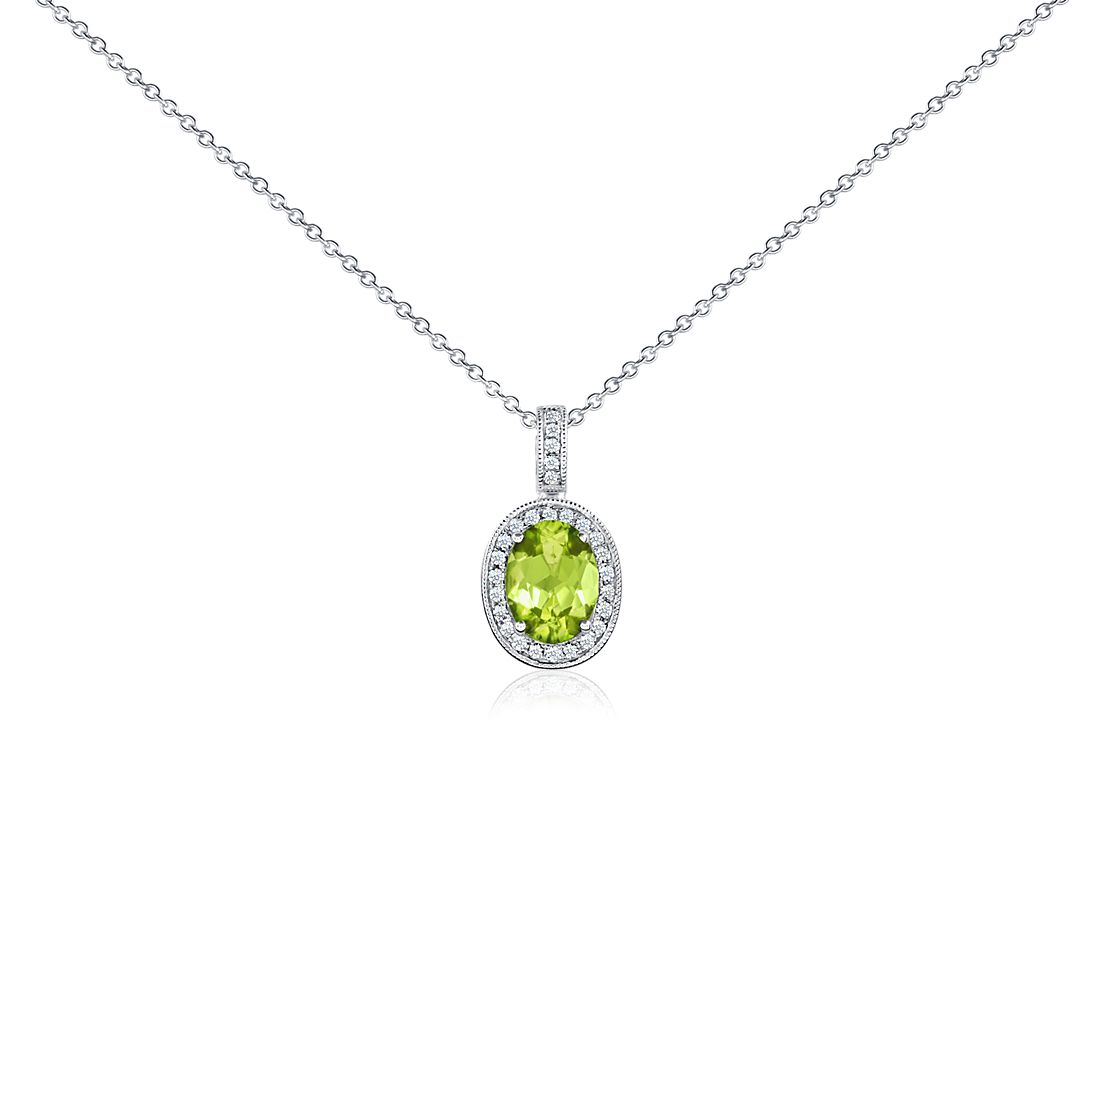 Oval Peridot and Diamond Pendant in 18k White Gold (8x6 mm)